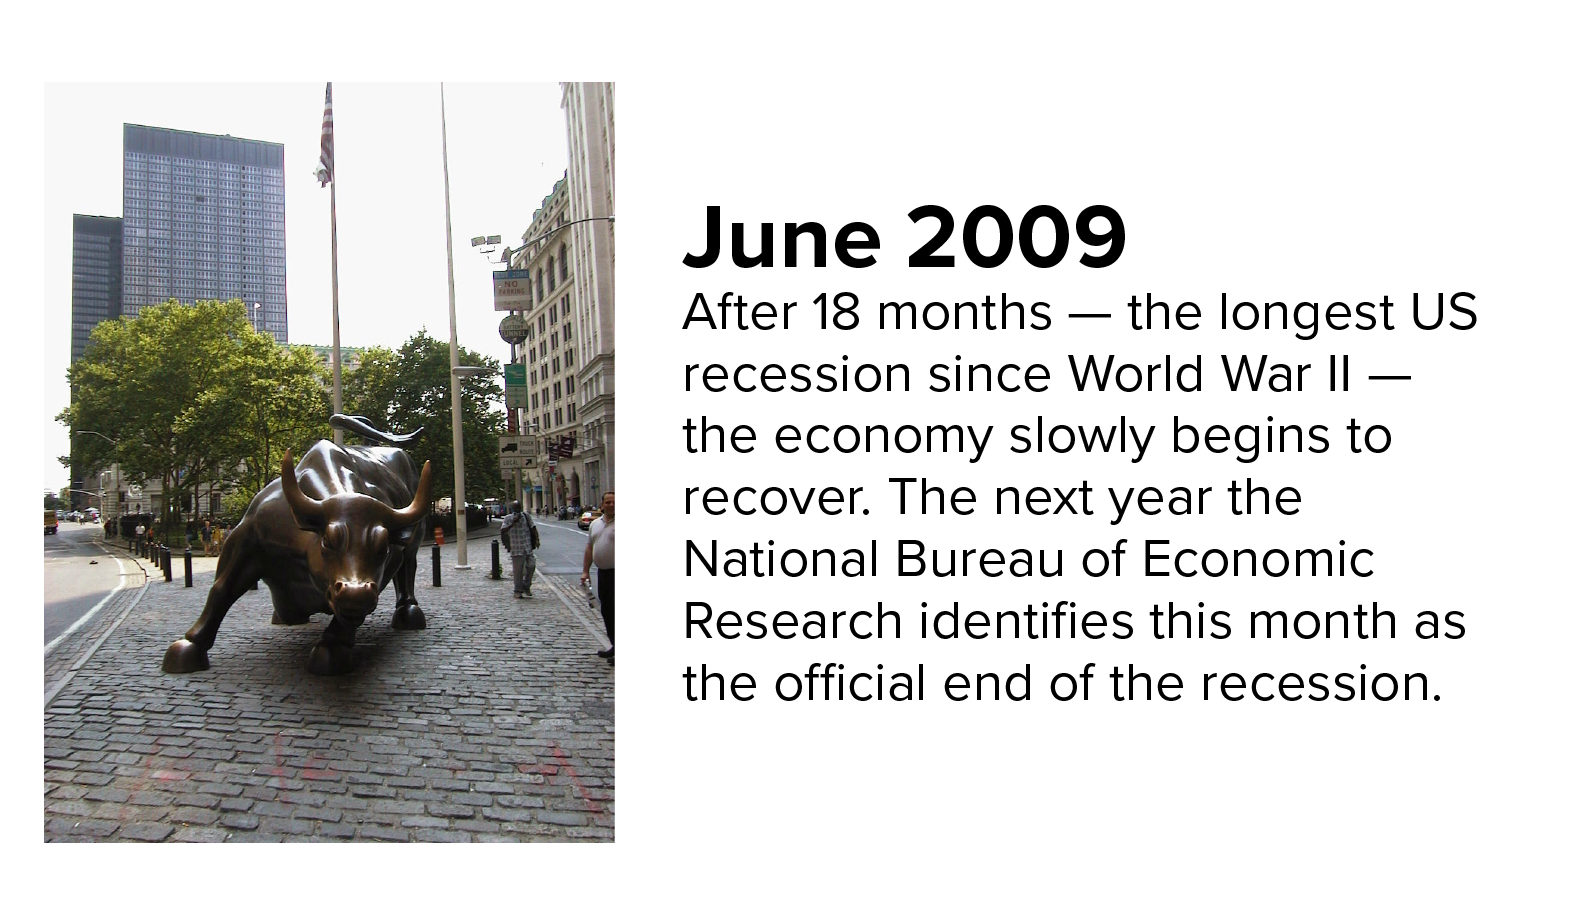 Photo of the Wall Street Bull. June 2009 marks the end of the 18-month Great Recession.